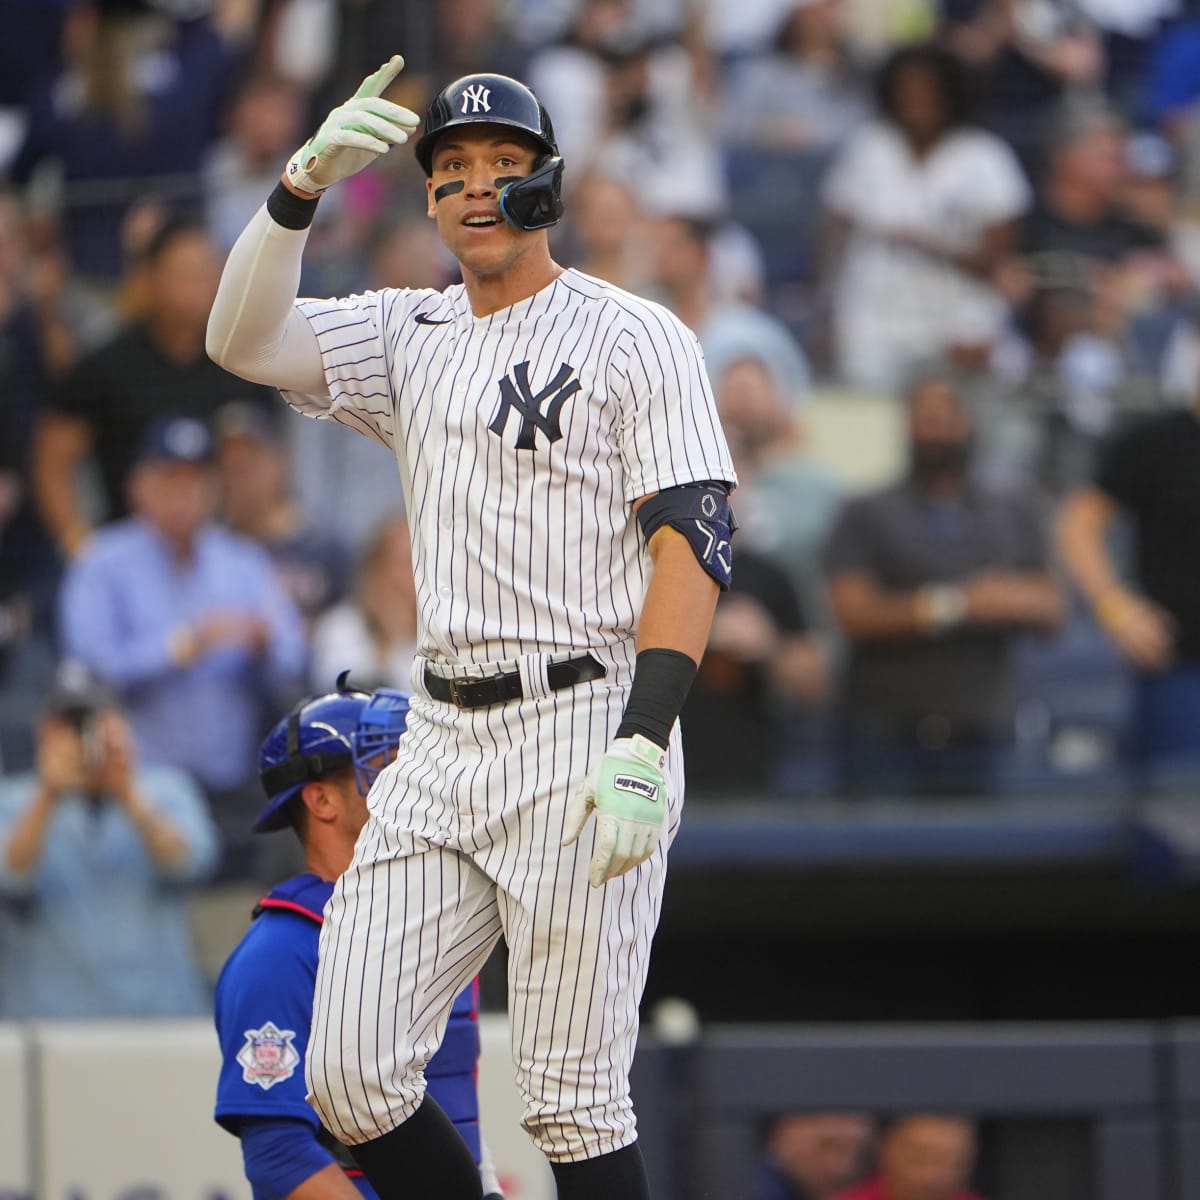 Giancarlo Stanton News, Biography, MLB Records, Stats & Facts